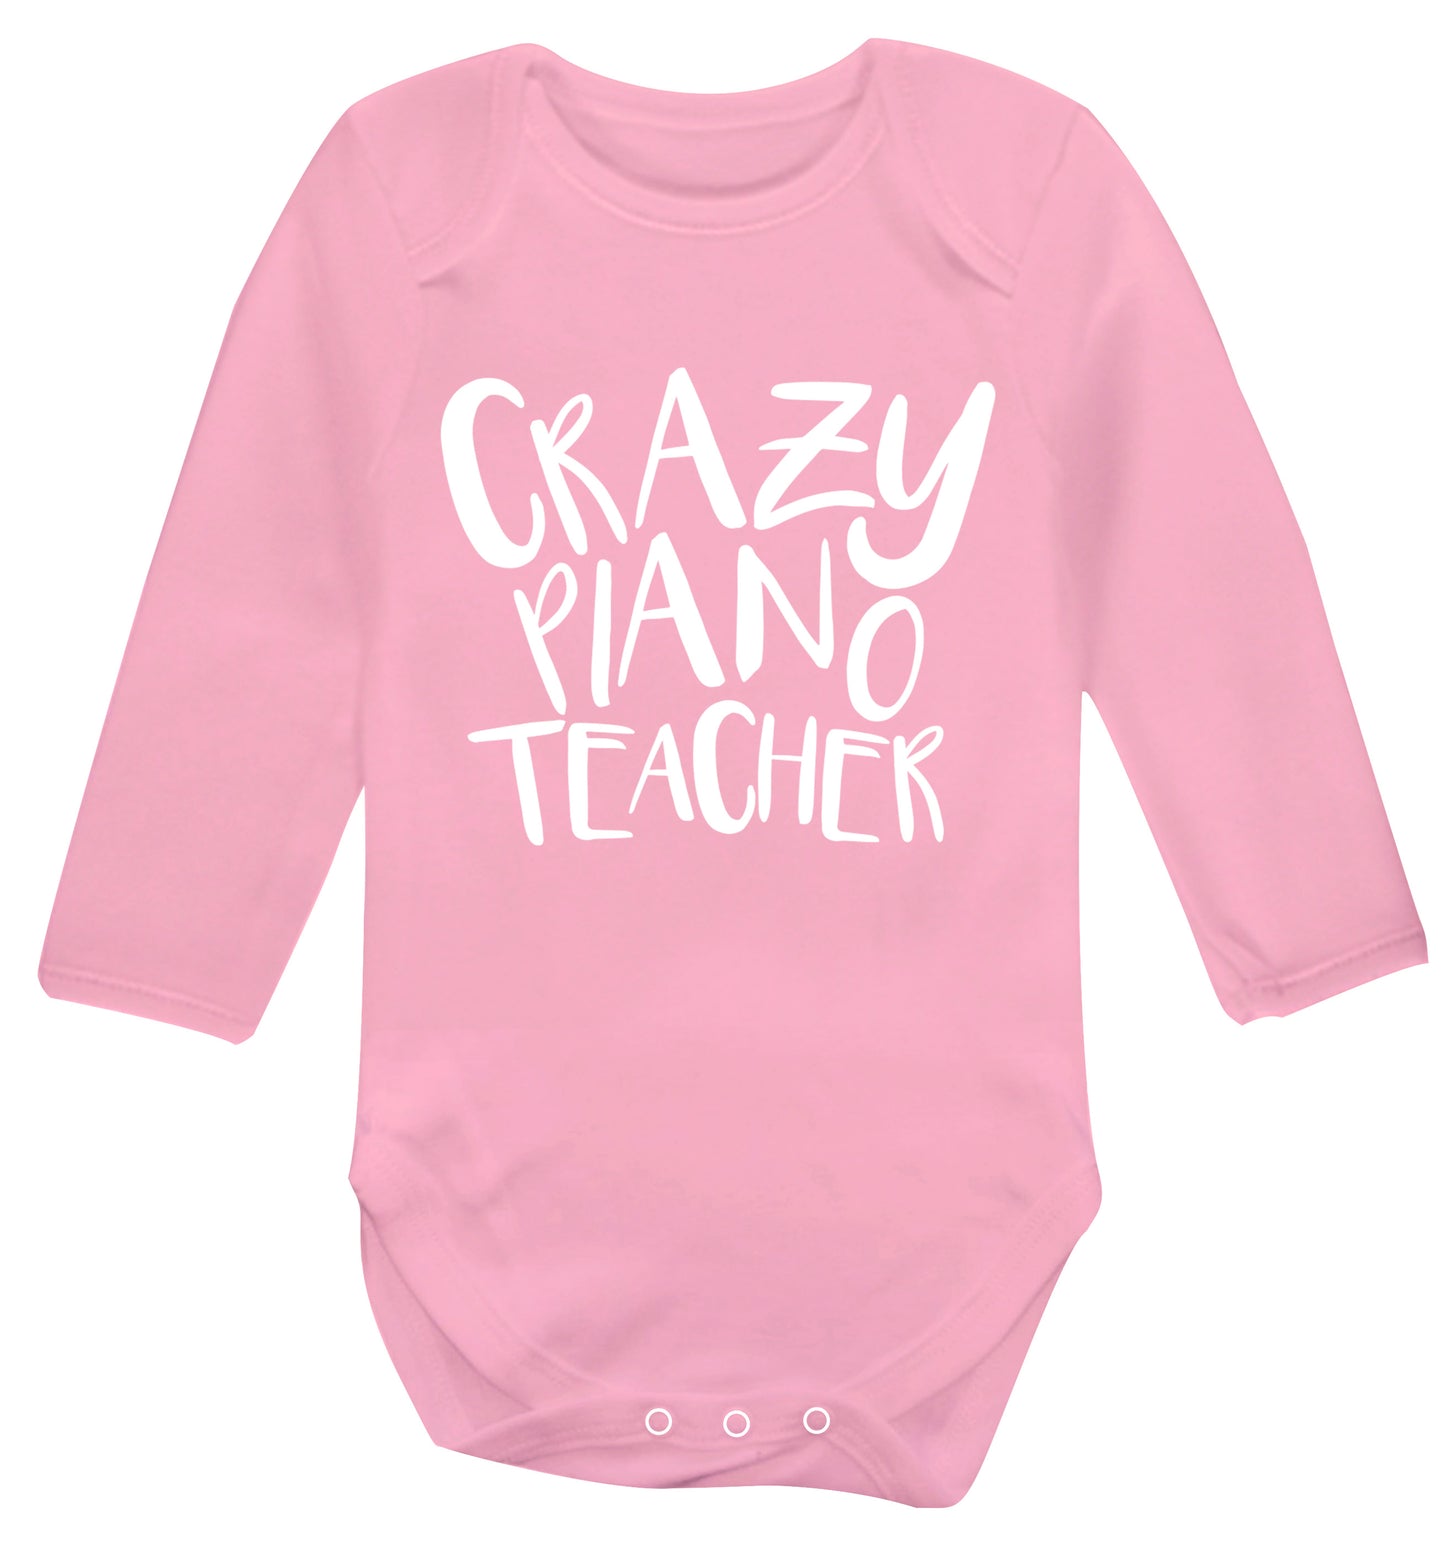 Crazy piano teacher Baby Vest long sleeved pale pink 6-12 months